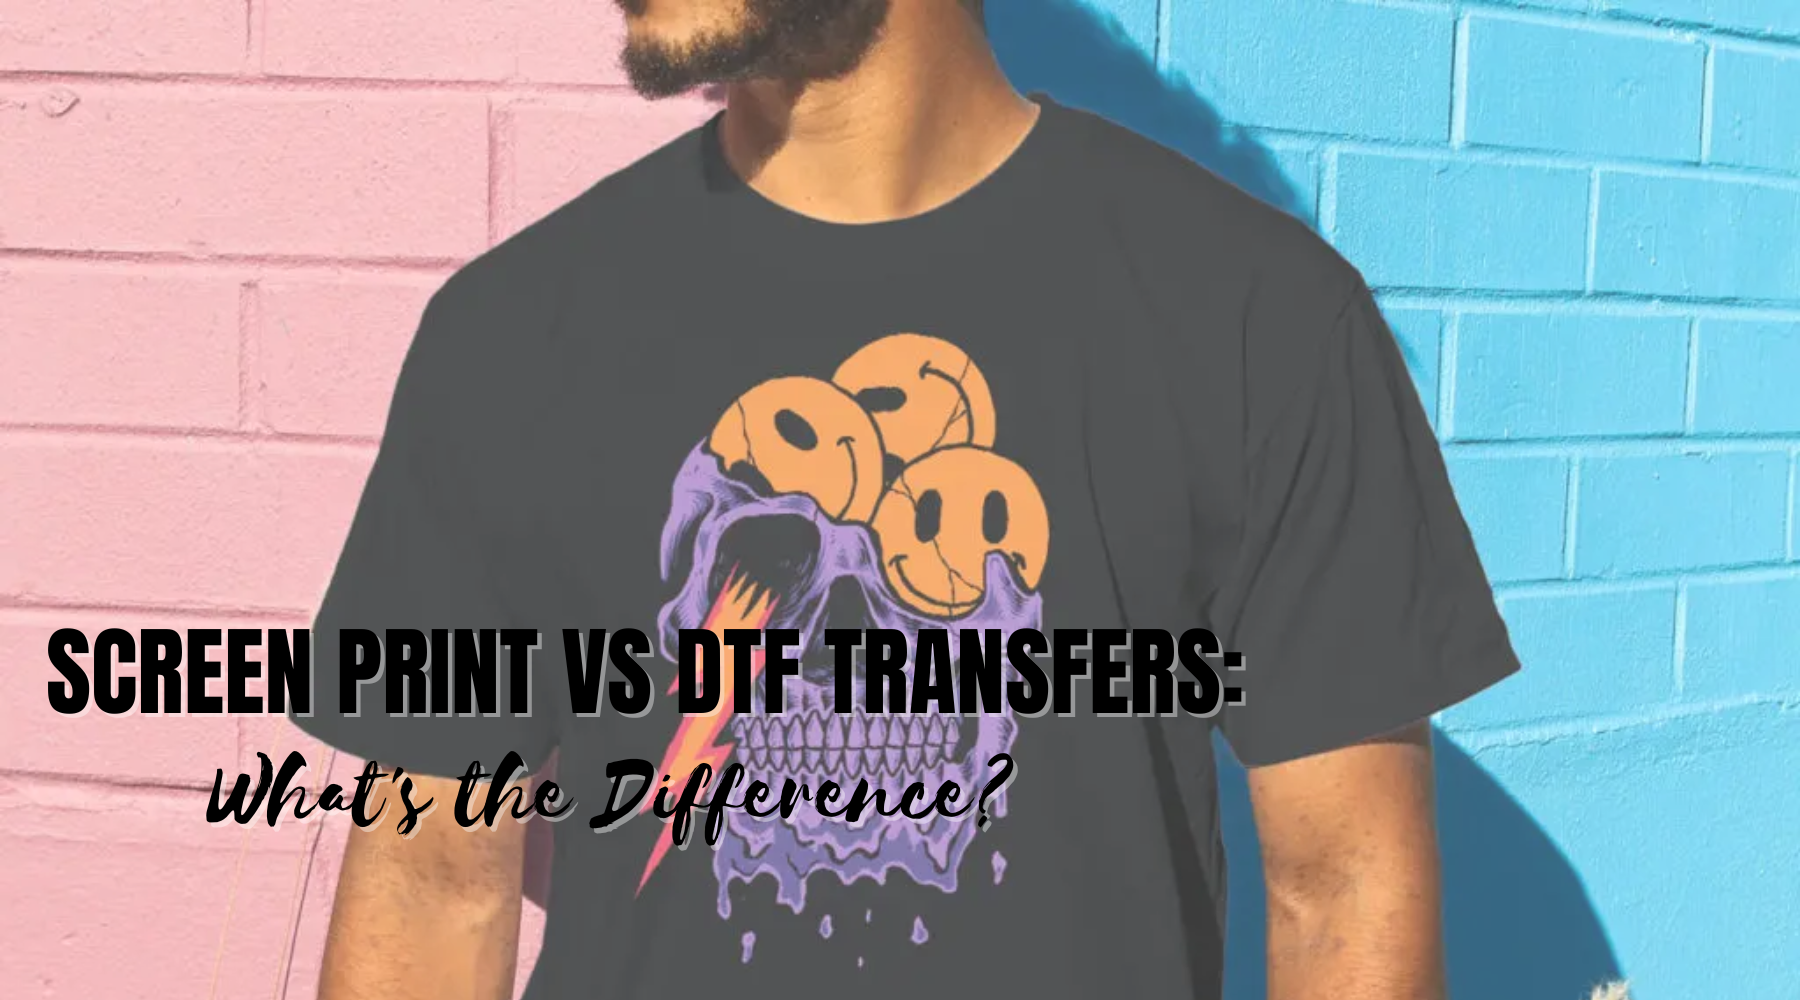 Custom DTF Transfers, Direct to Film Printing, DTF Printed T-Shirts – Quick  Transfers